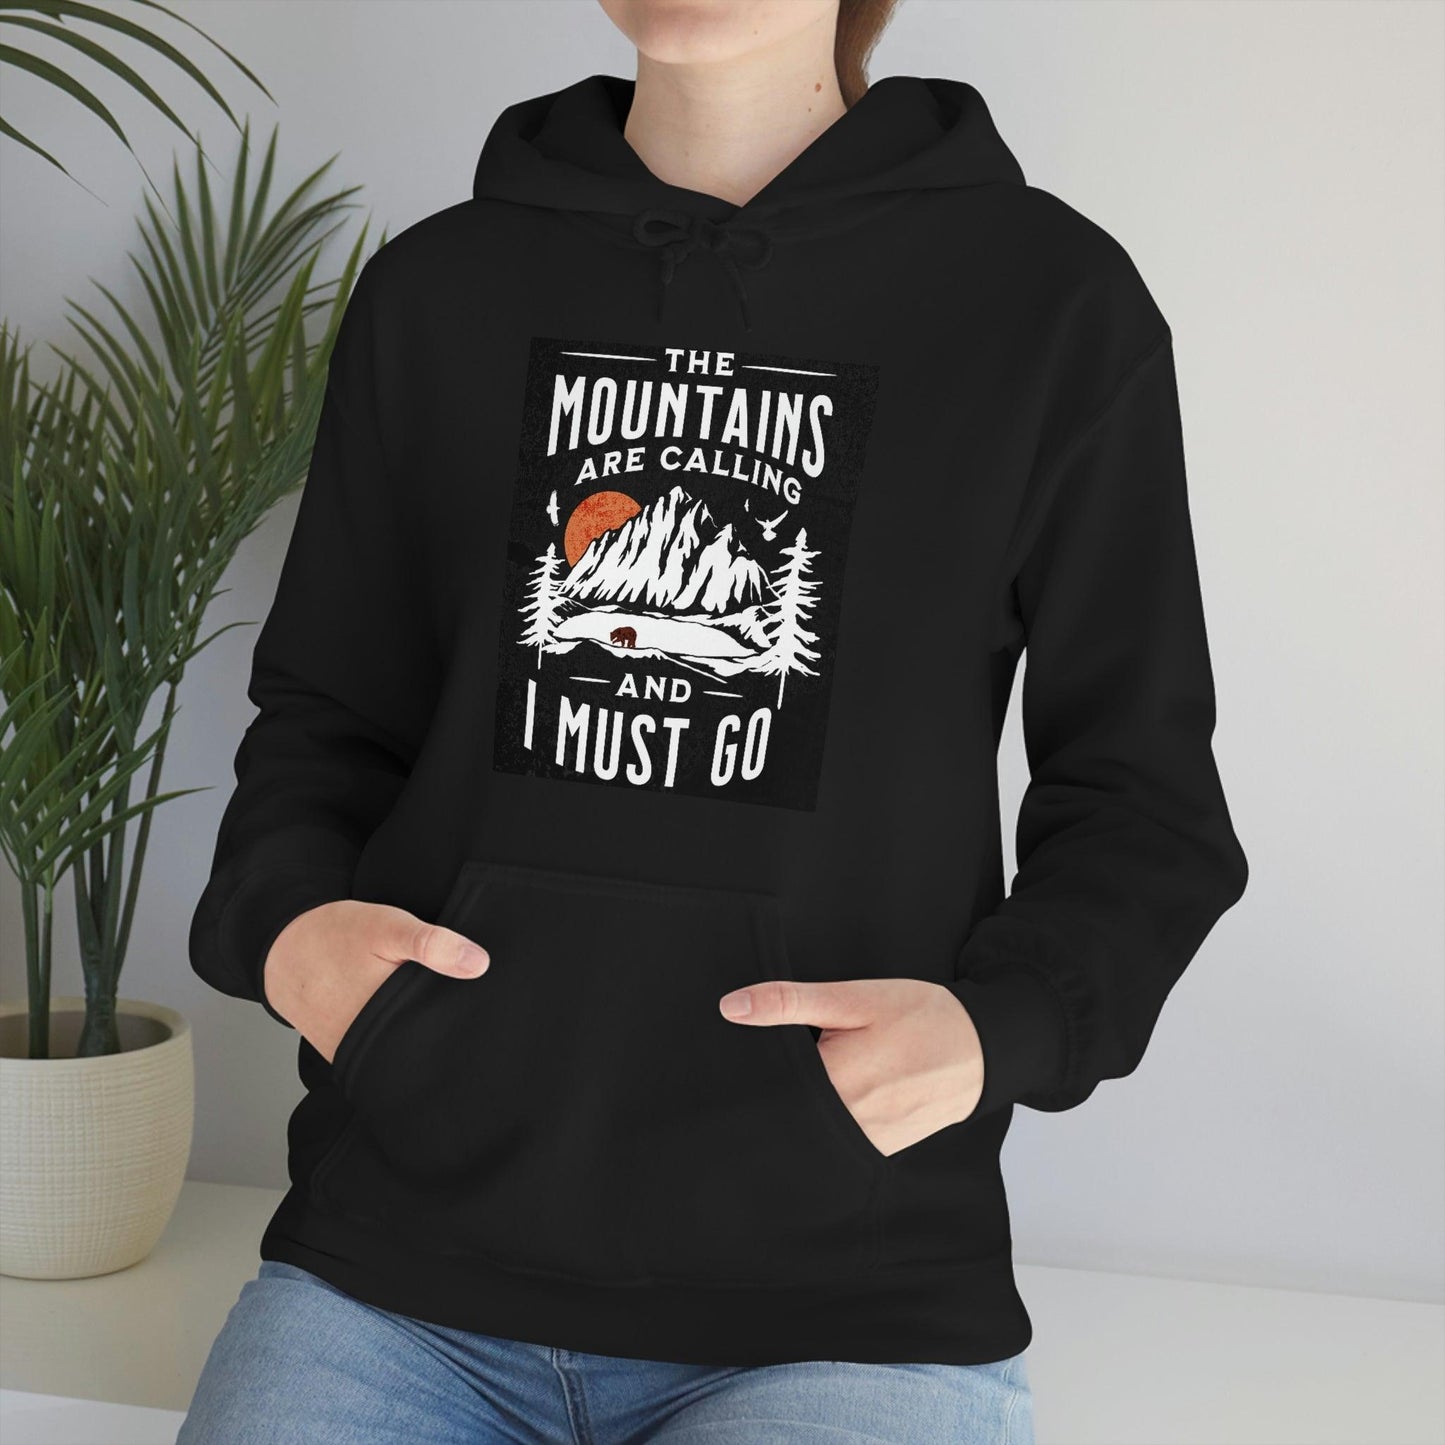 The Mountains are calling Hooded Sweatshirt